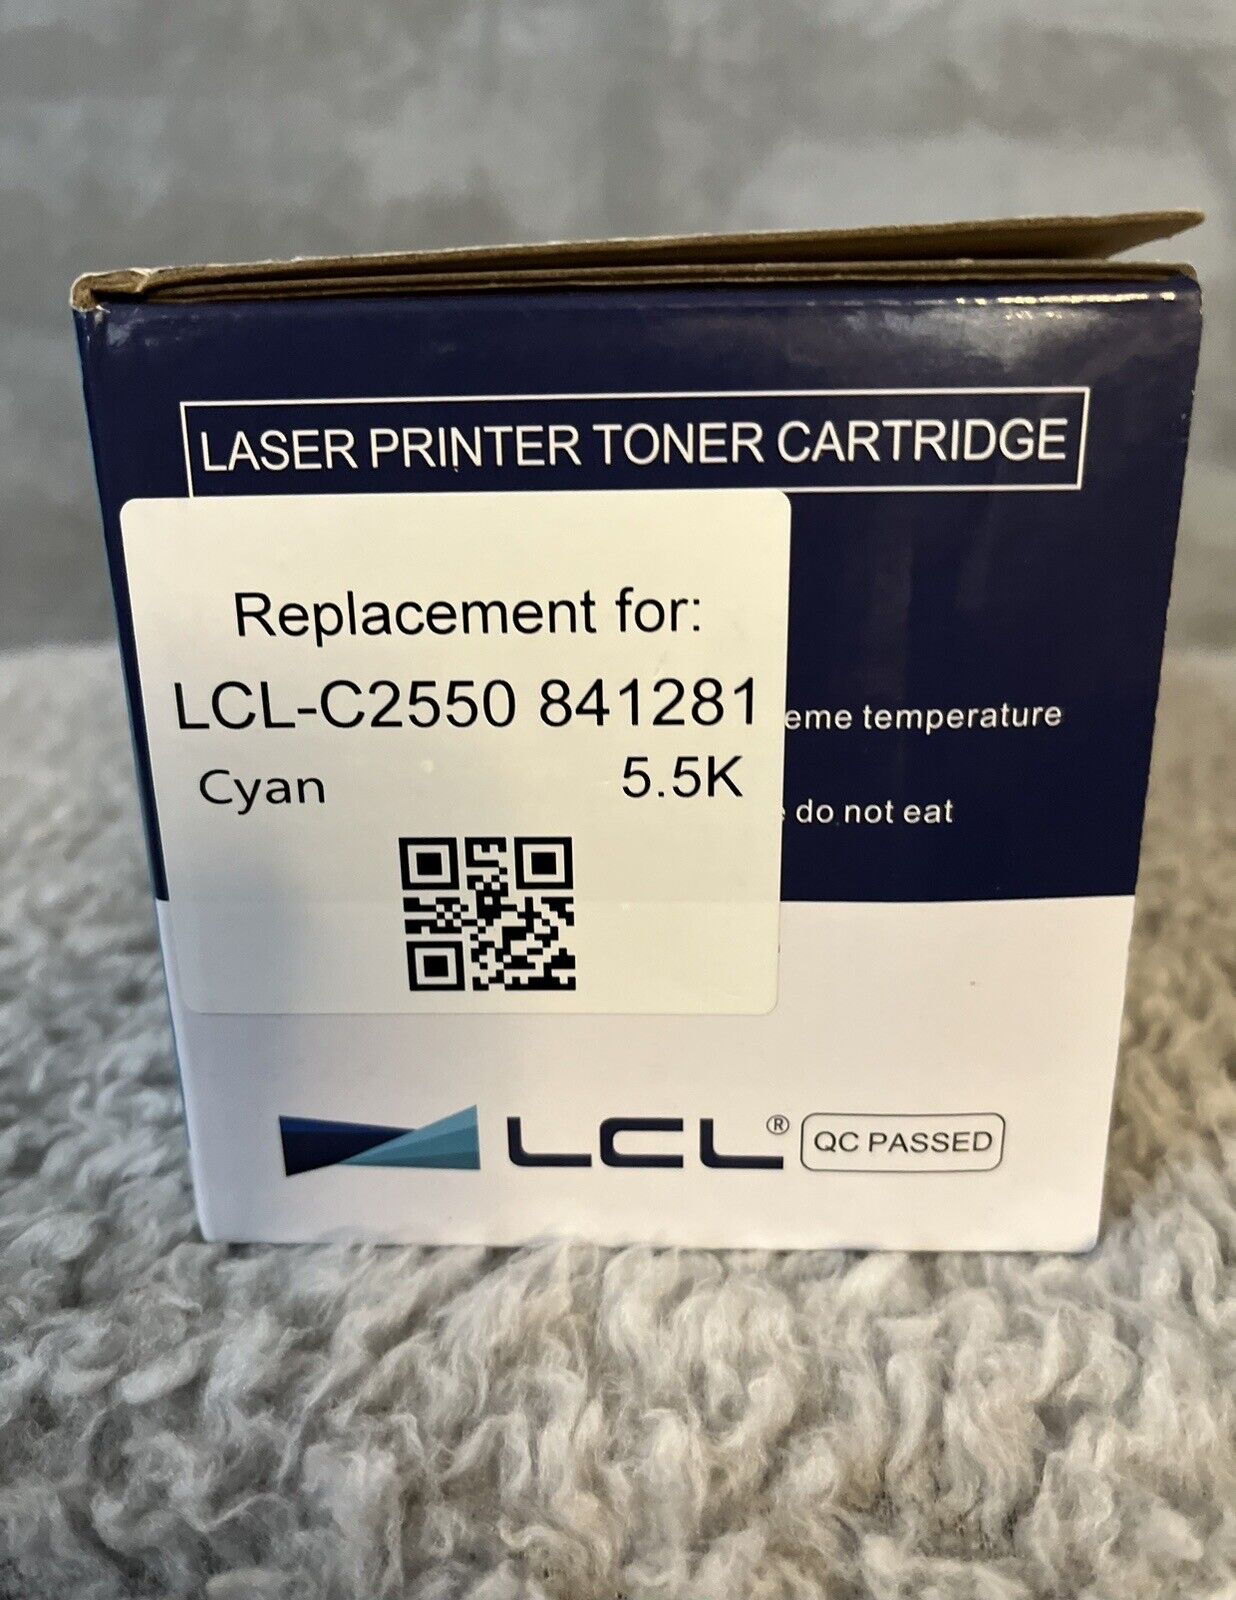 LCL Laser Printer Toner Cartridge Replacement for LCL-C2550 841281 Cyan